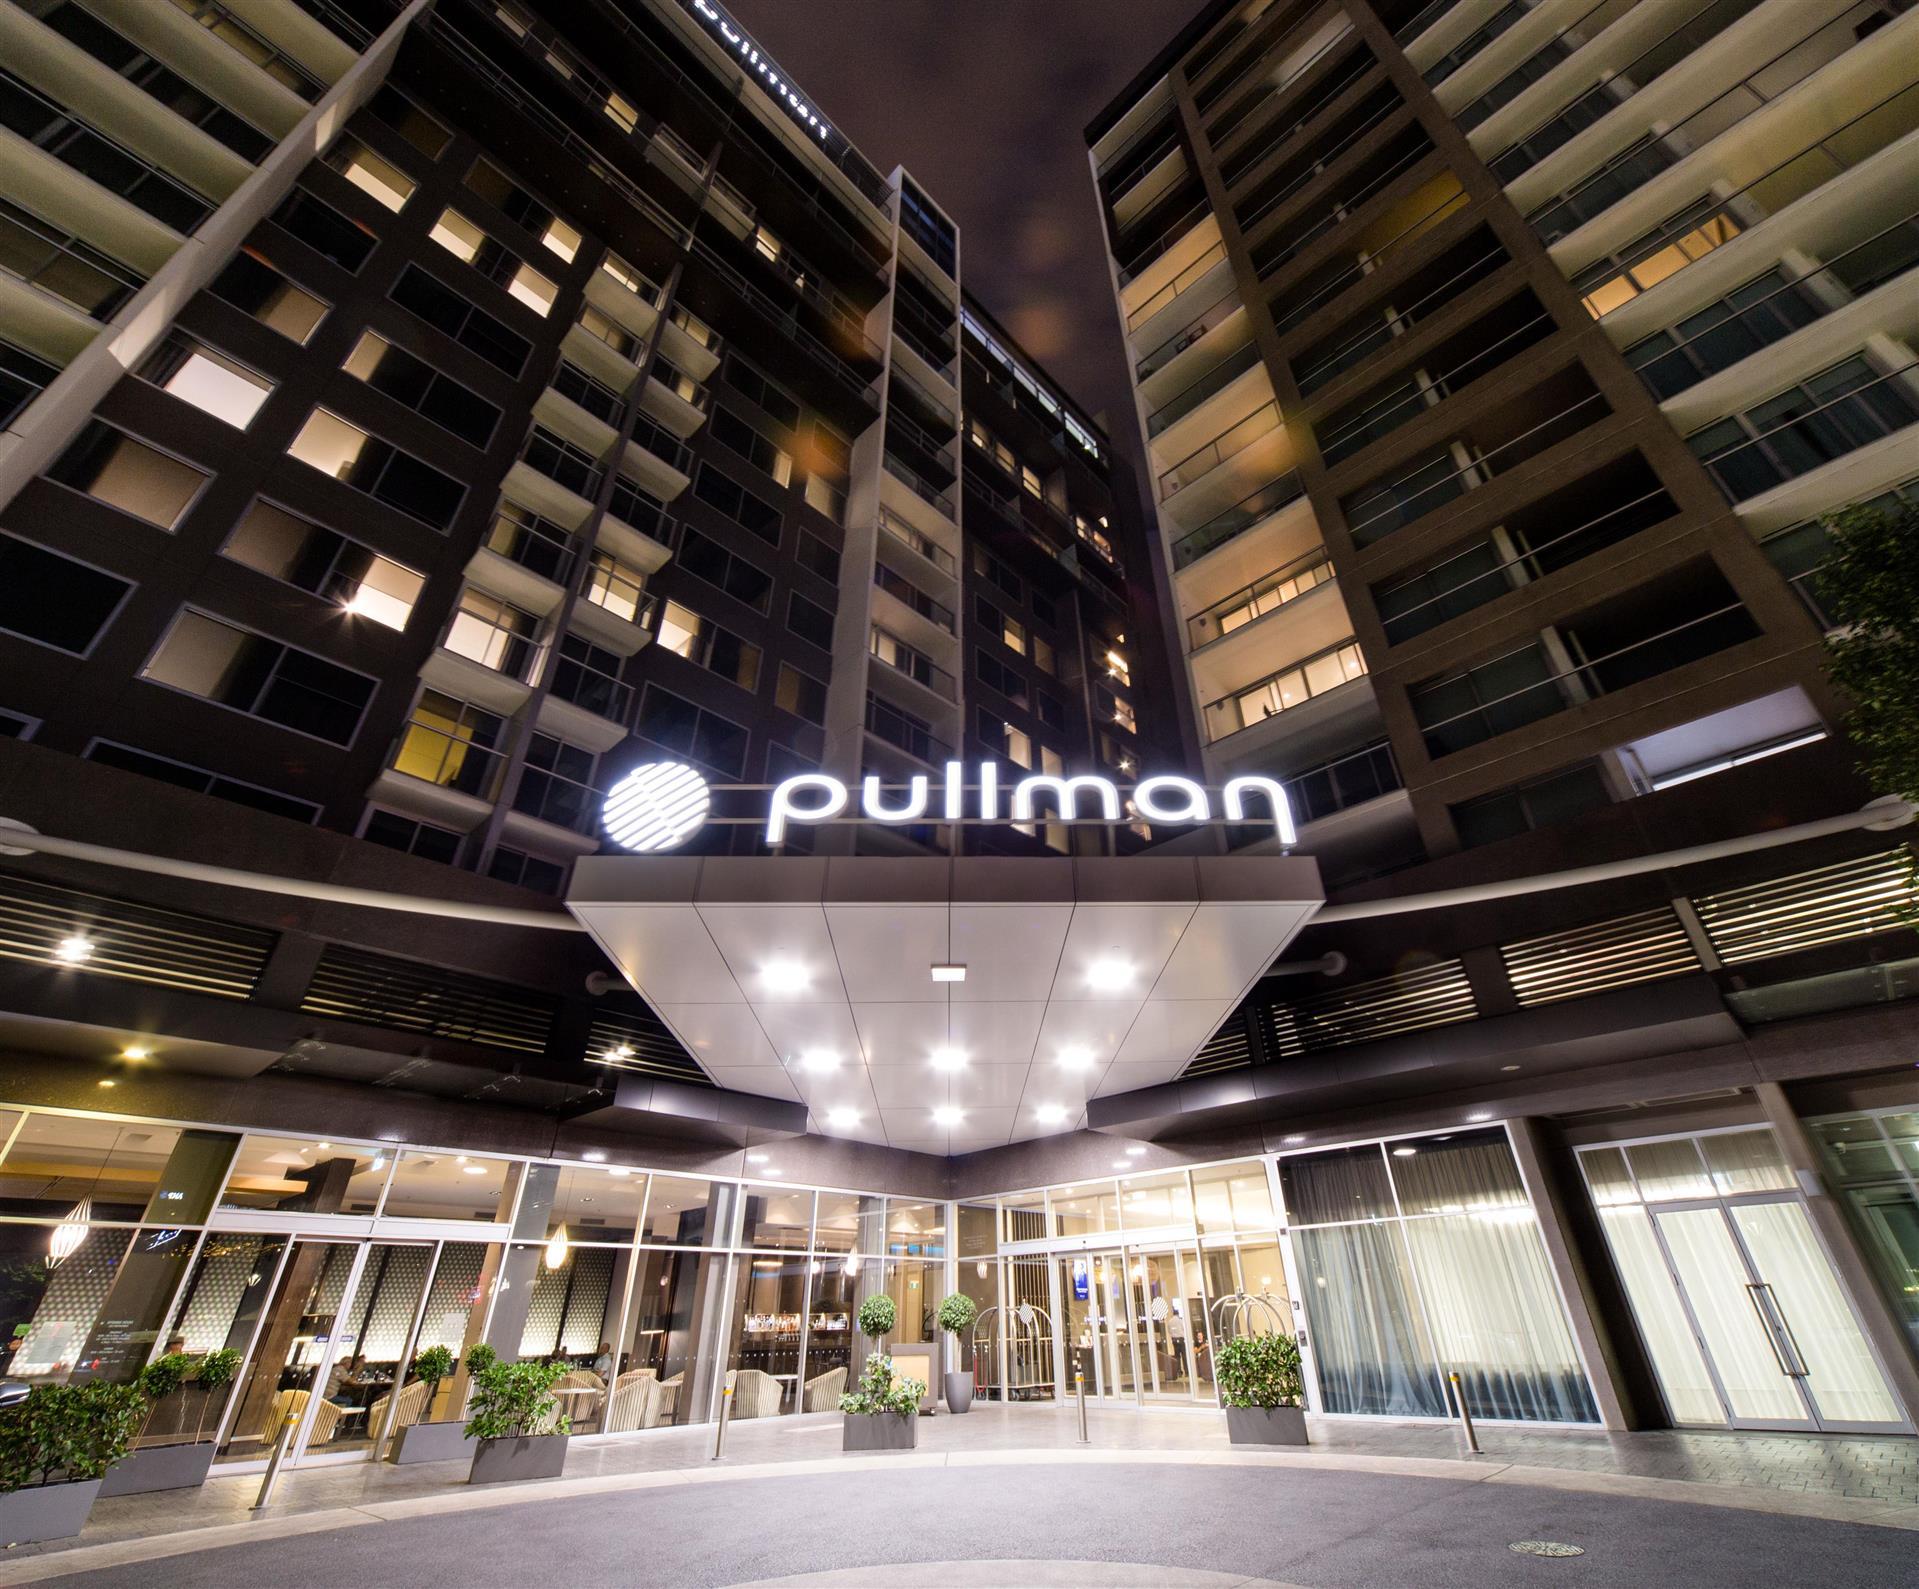 Hotel Pullman Adelaide in Adelaide, AU